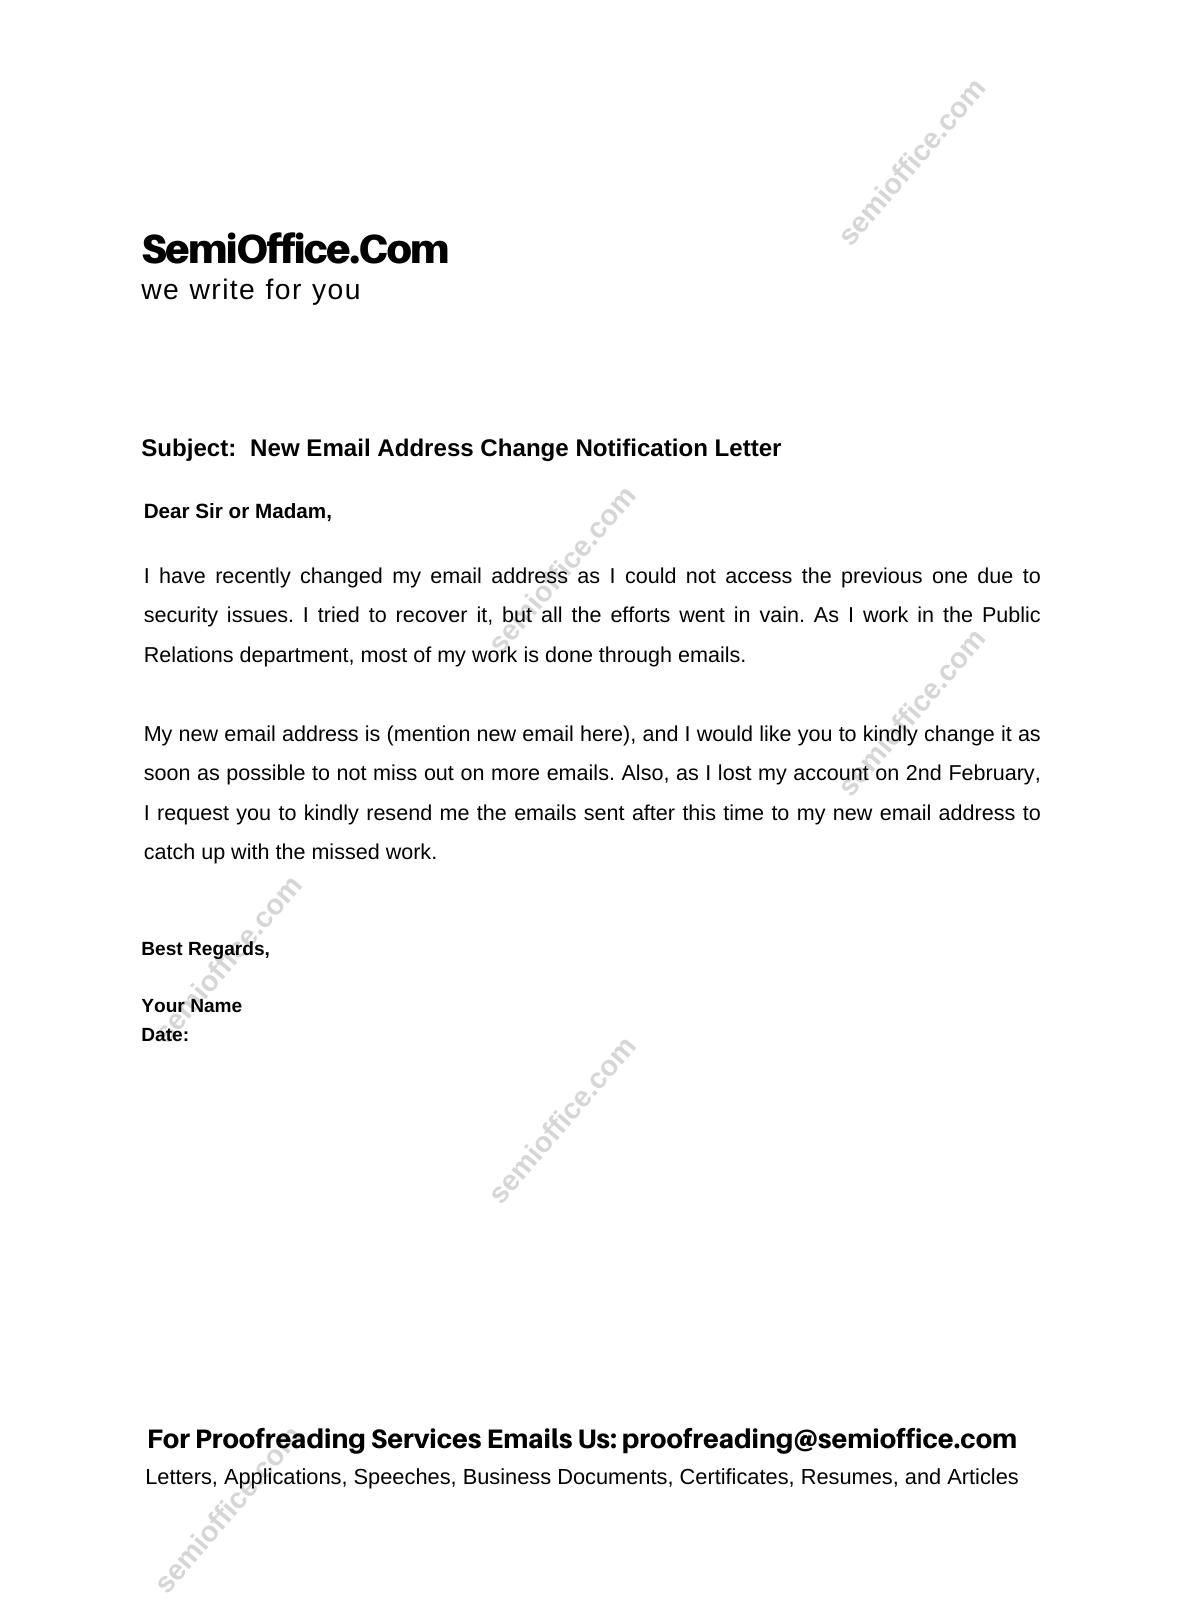 New Email Address Change Notification Letter | SemiOffice.Com